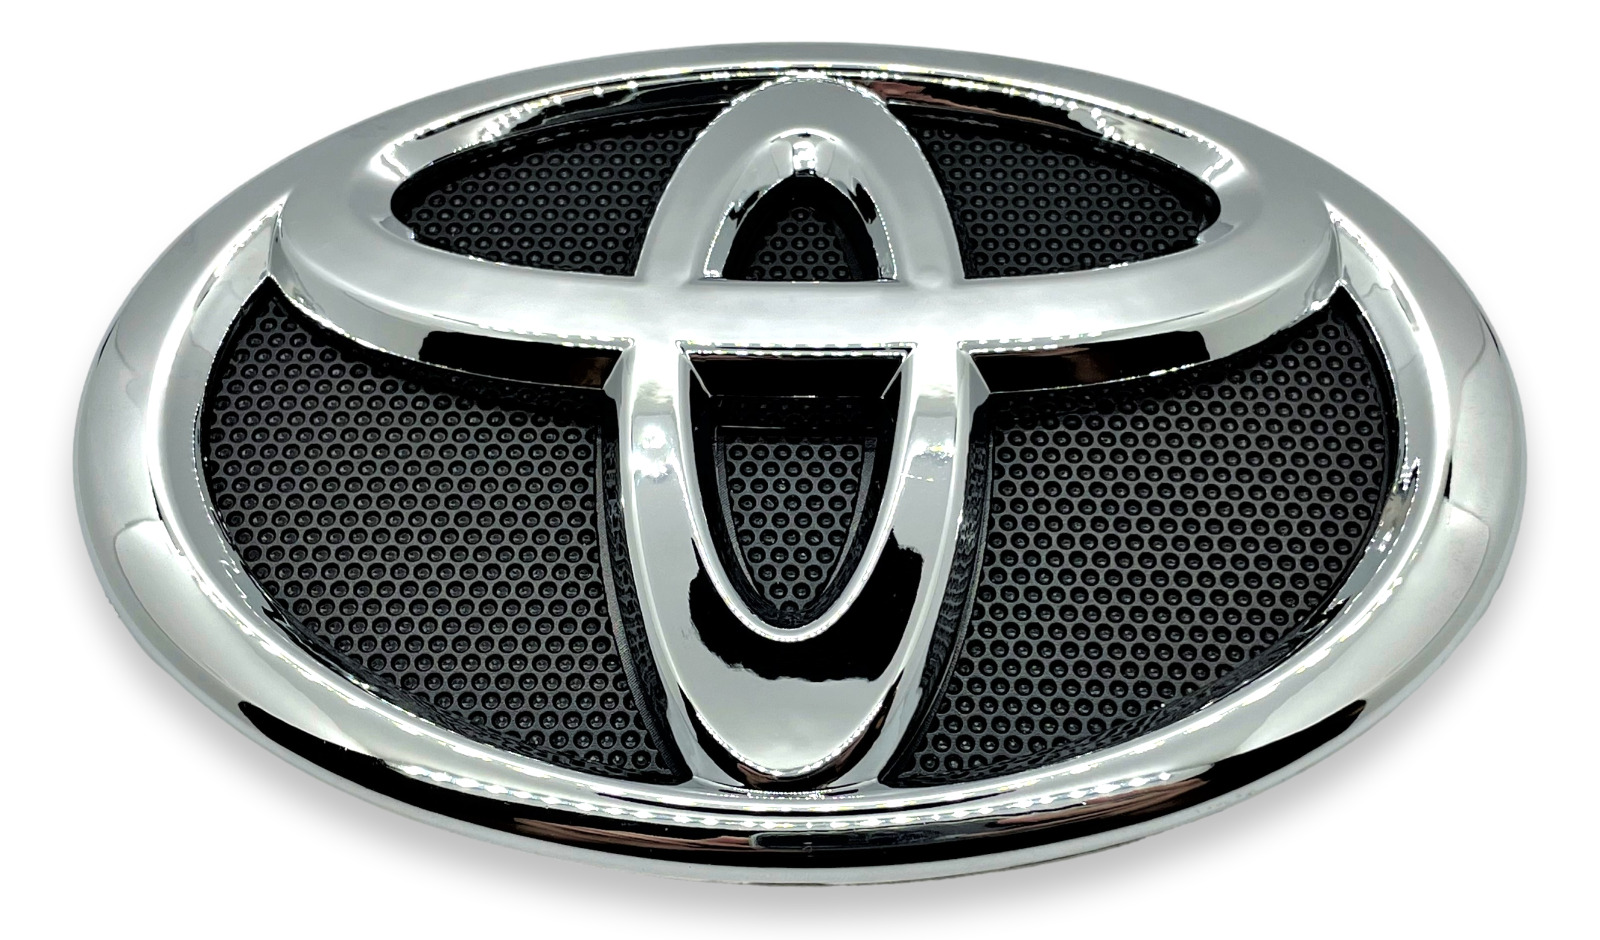 FOR TOYOTA CAMRY 2010 2011 FRONT BUMPER GRILL EMBLEM